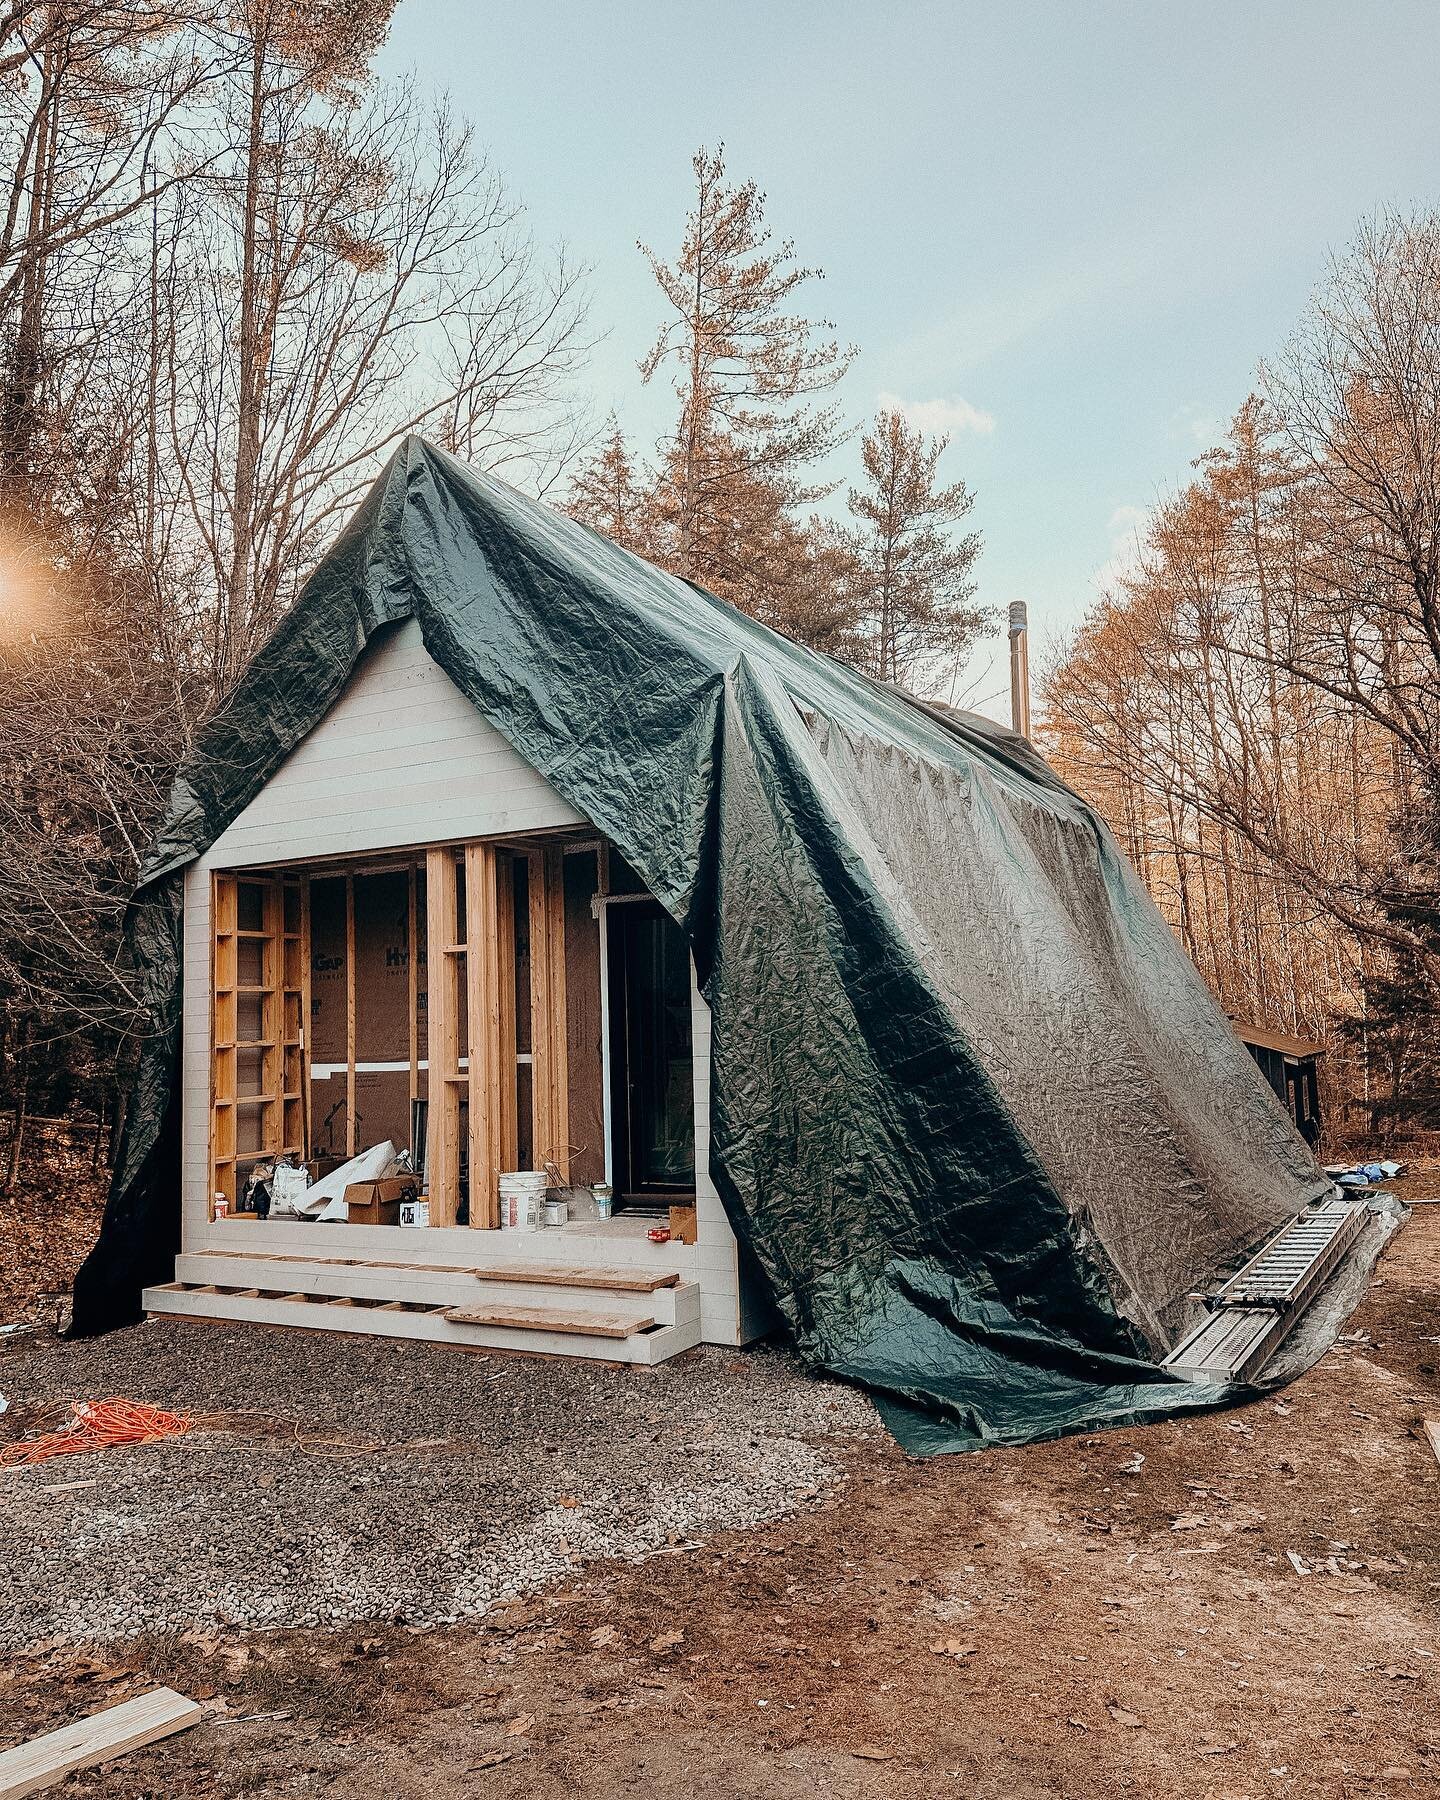 👉🏻 Swipe 👉🏻 Who wore the winter coat best: Our foreman or this tiny home? 🧣❄️

#uppervalley #heyuppervalley #upval #uppervalleyvtnh #generalcontractor #localbusiness #builders #mjtoonconstruction